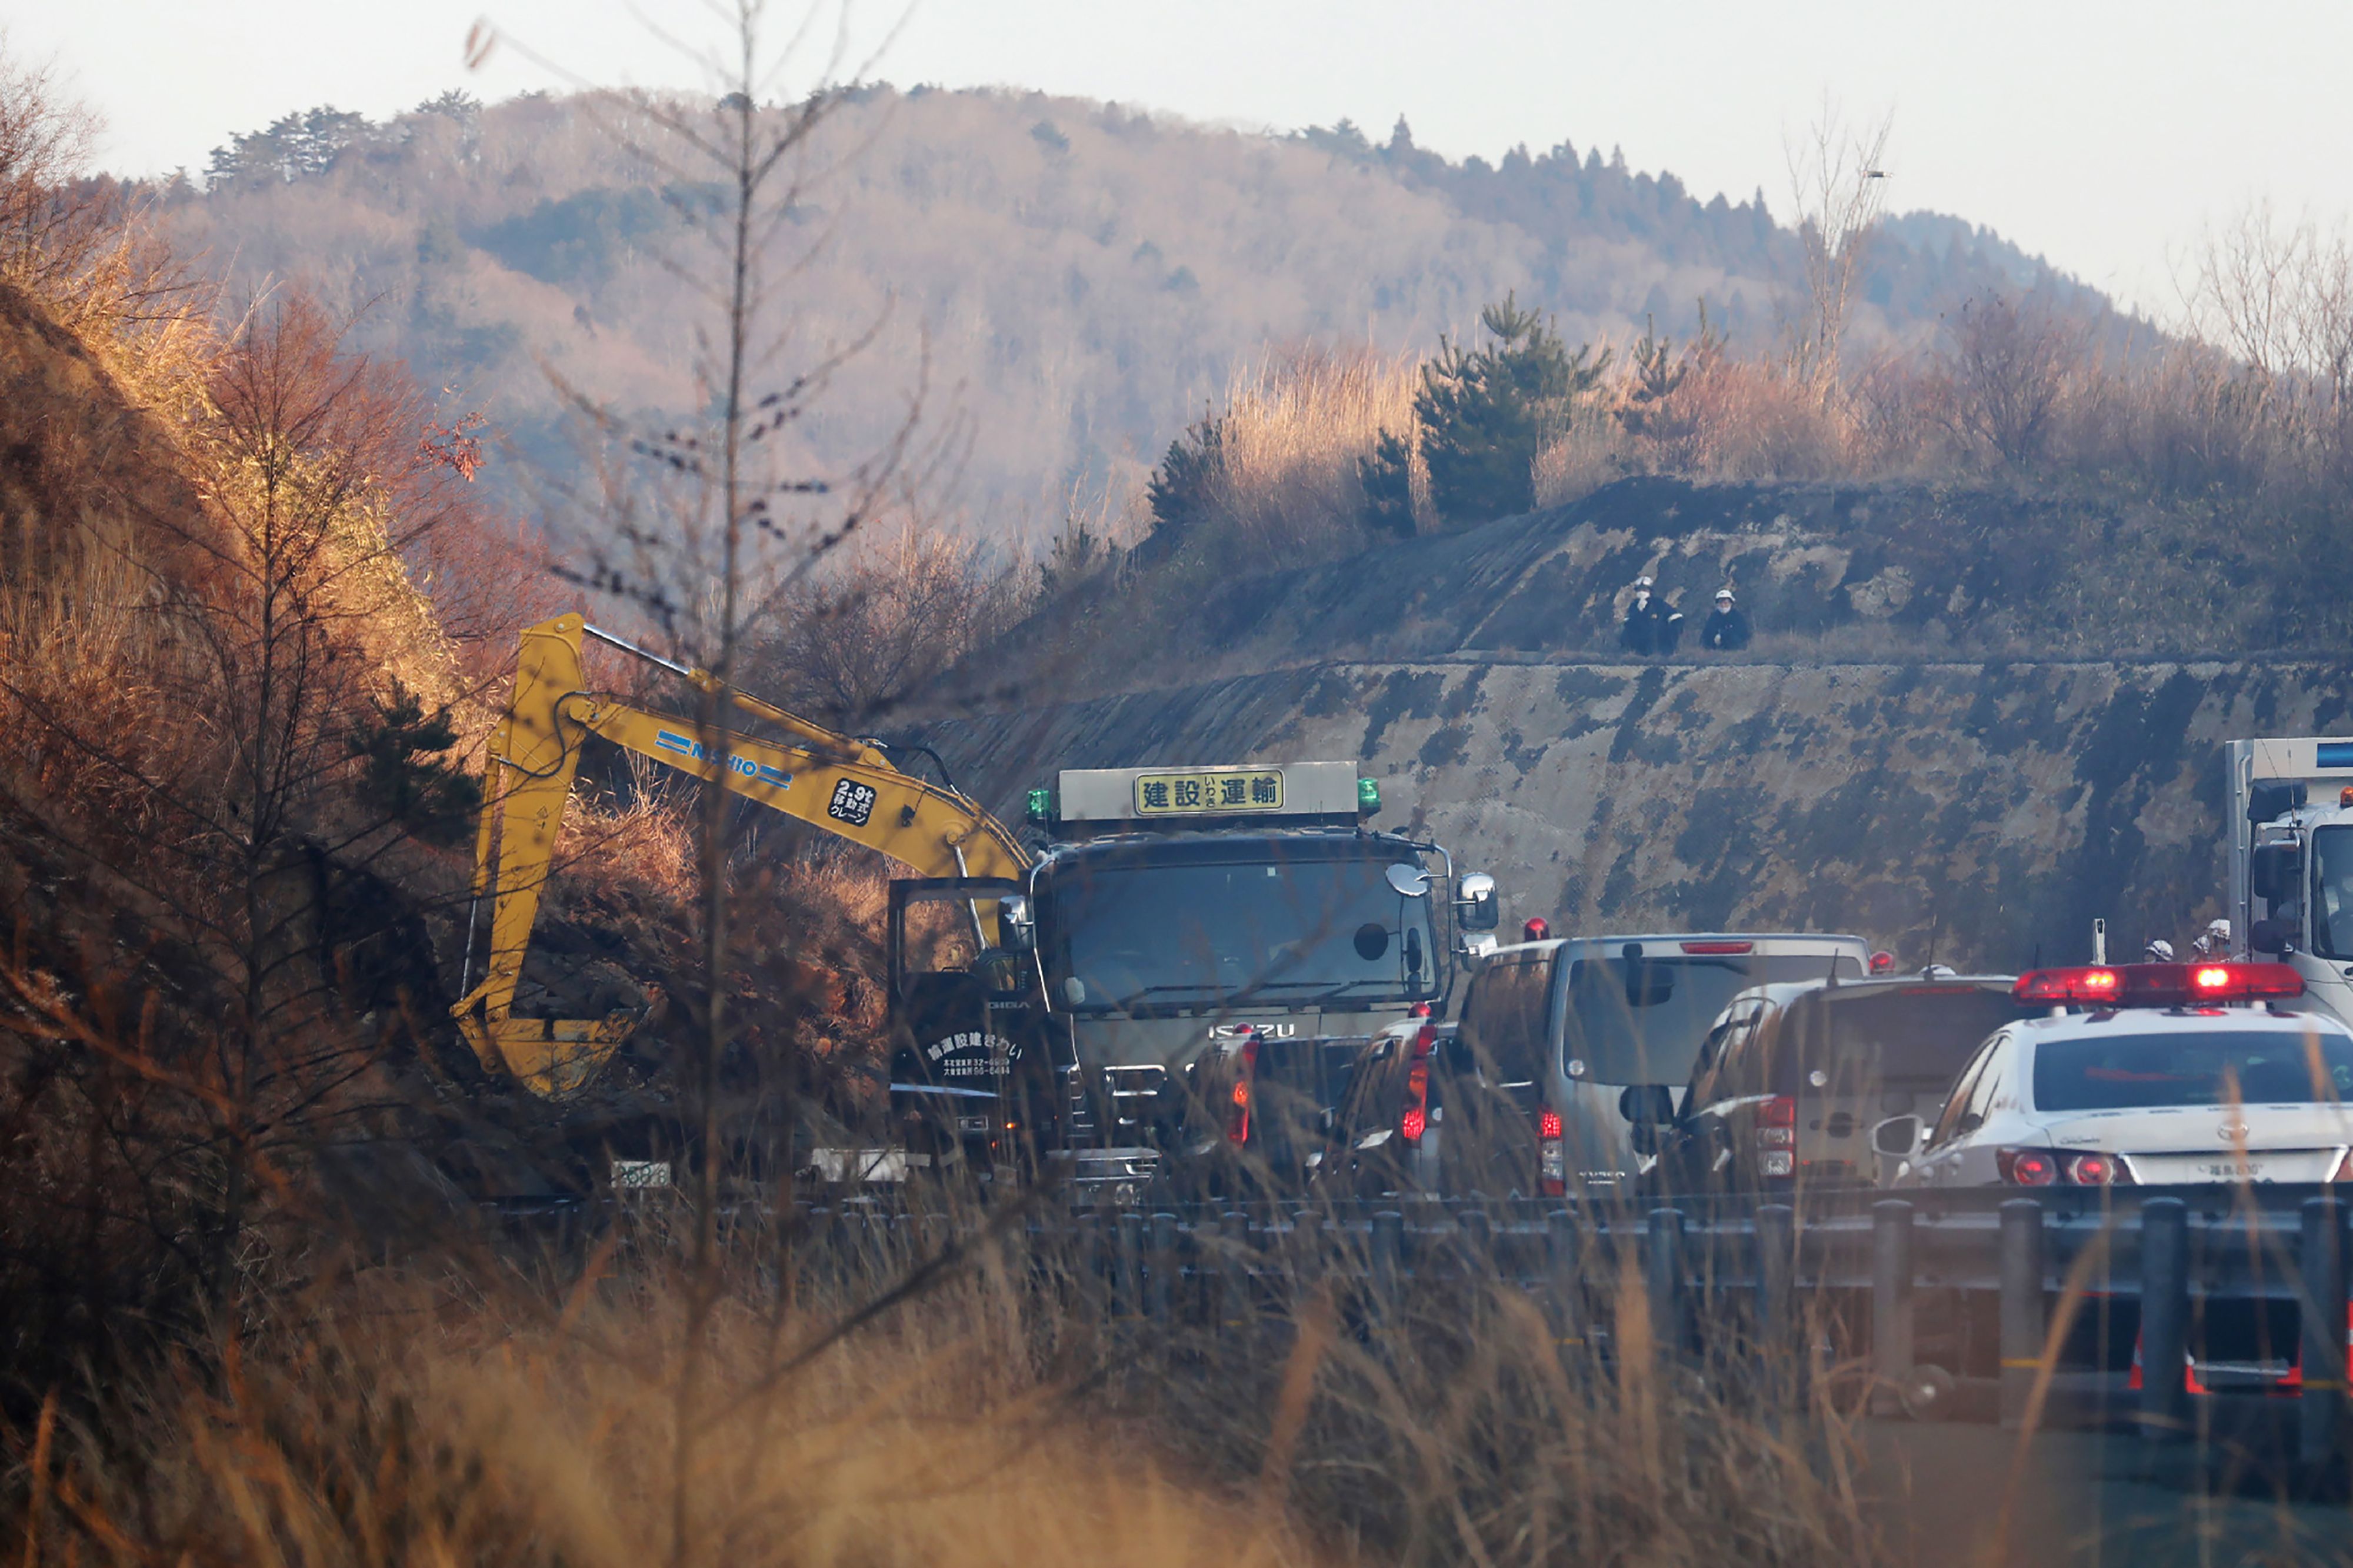 A power excavator heavy equipment for restoration work at the landslide site on the Joban Expressway in Soma, Fukushima prefecture on February 14